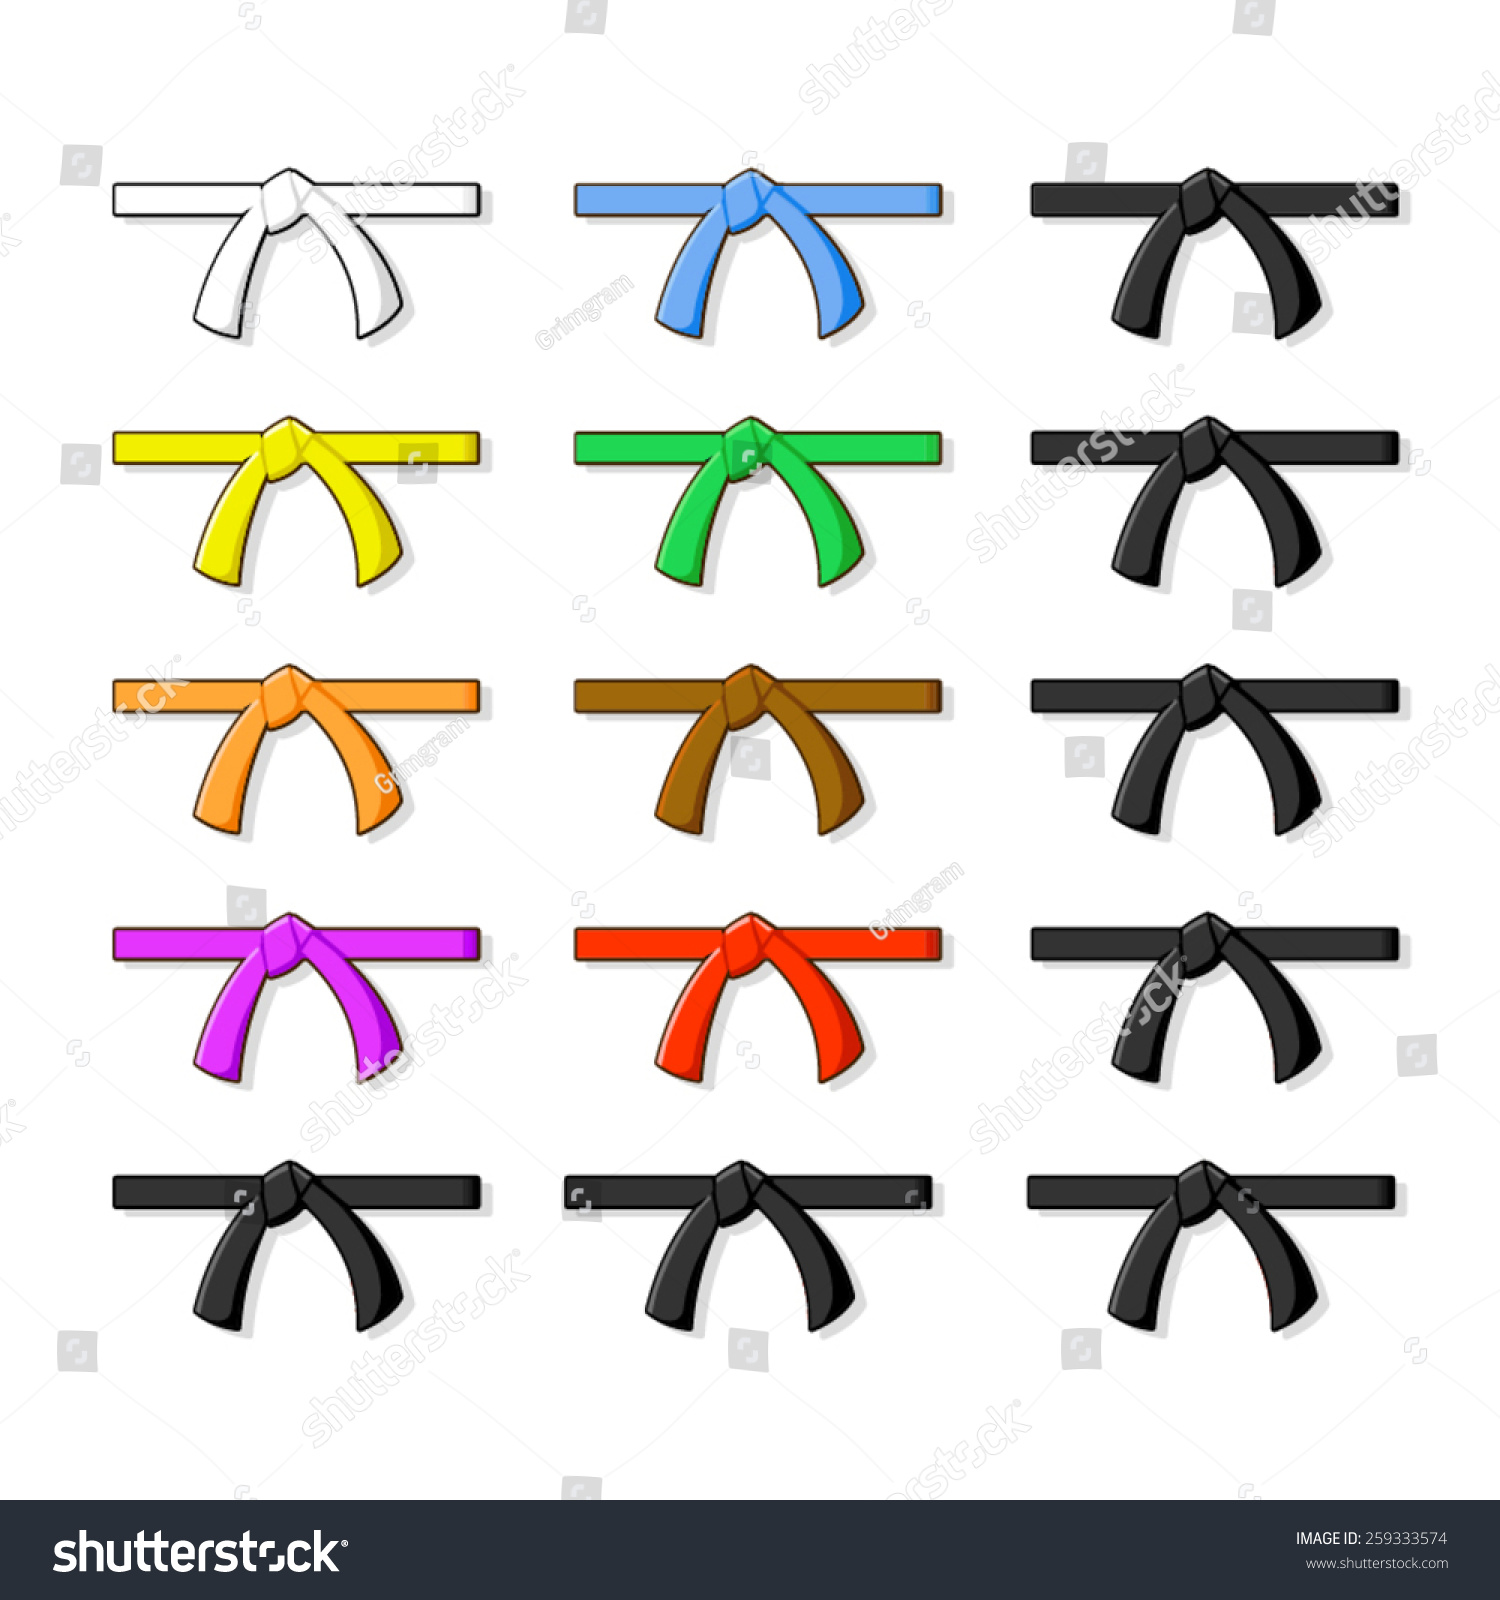 A Vector Illustration Of Traditional Martial Arts Belts For Grading ...